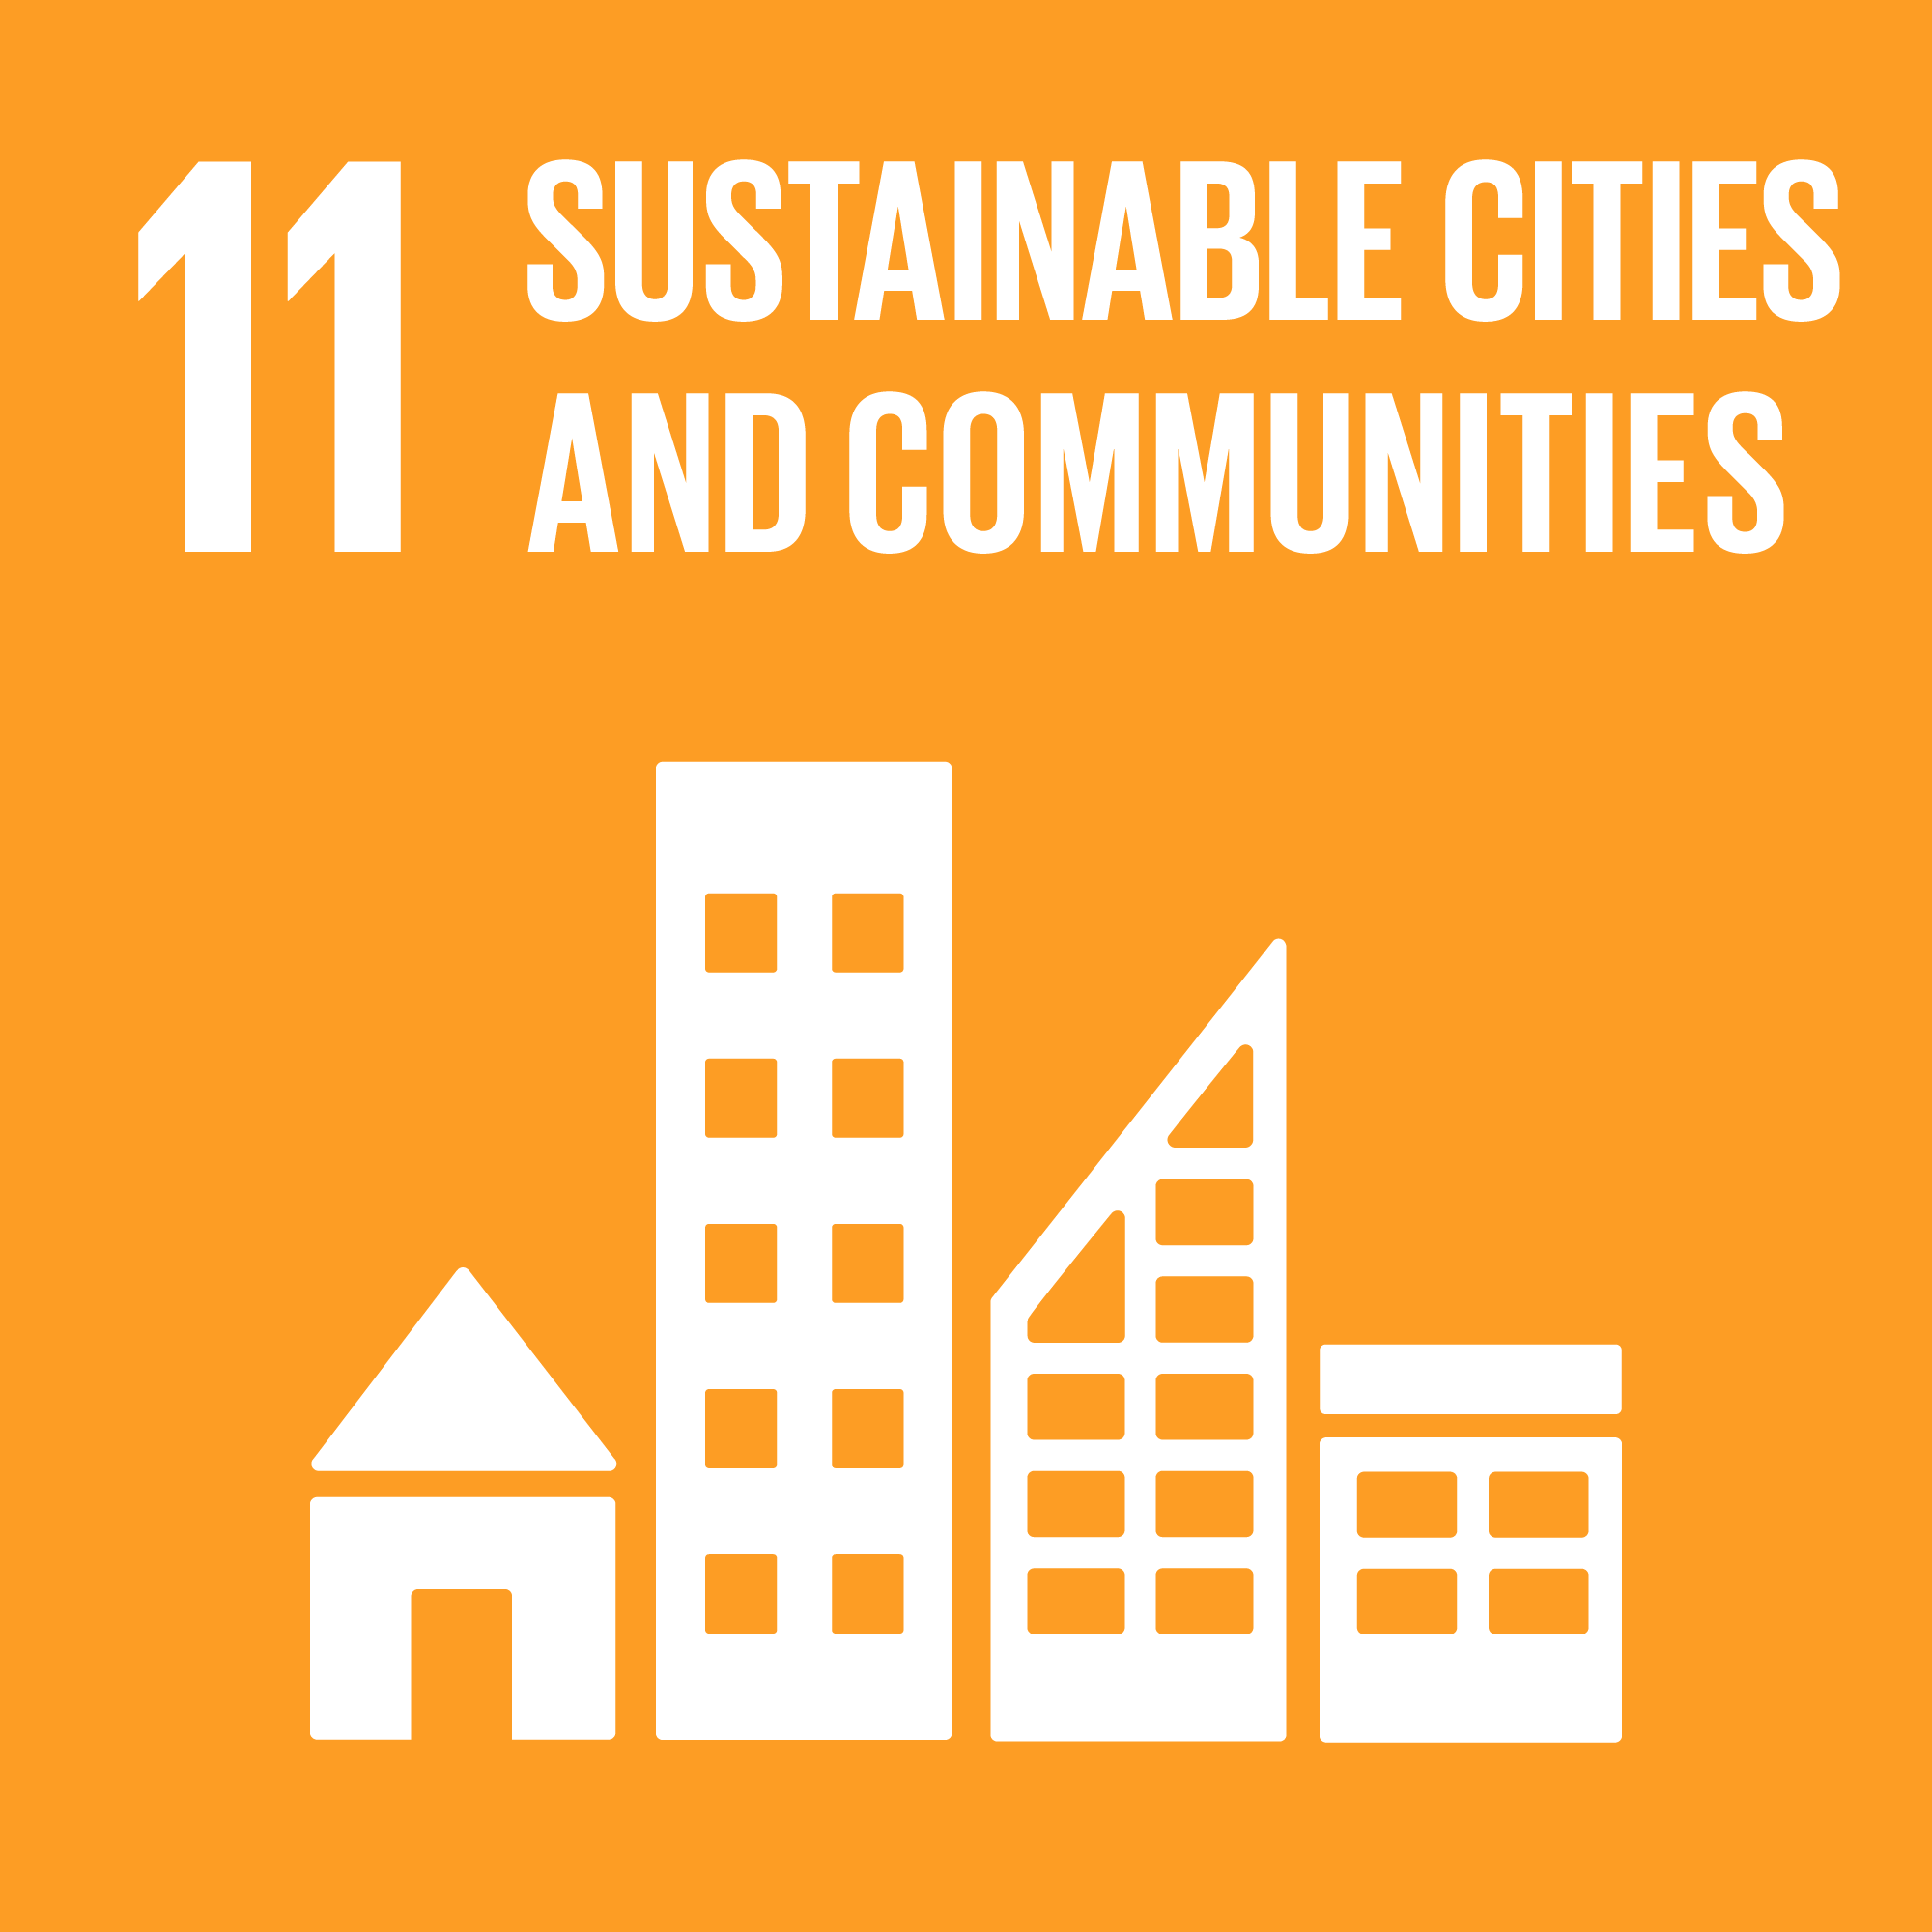 UN sustainability goal number 11